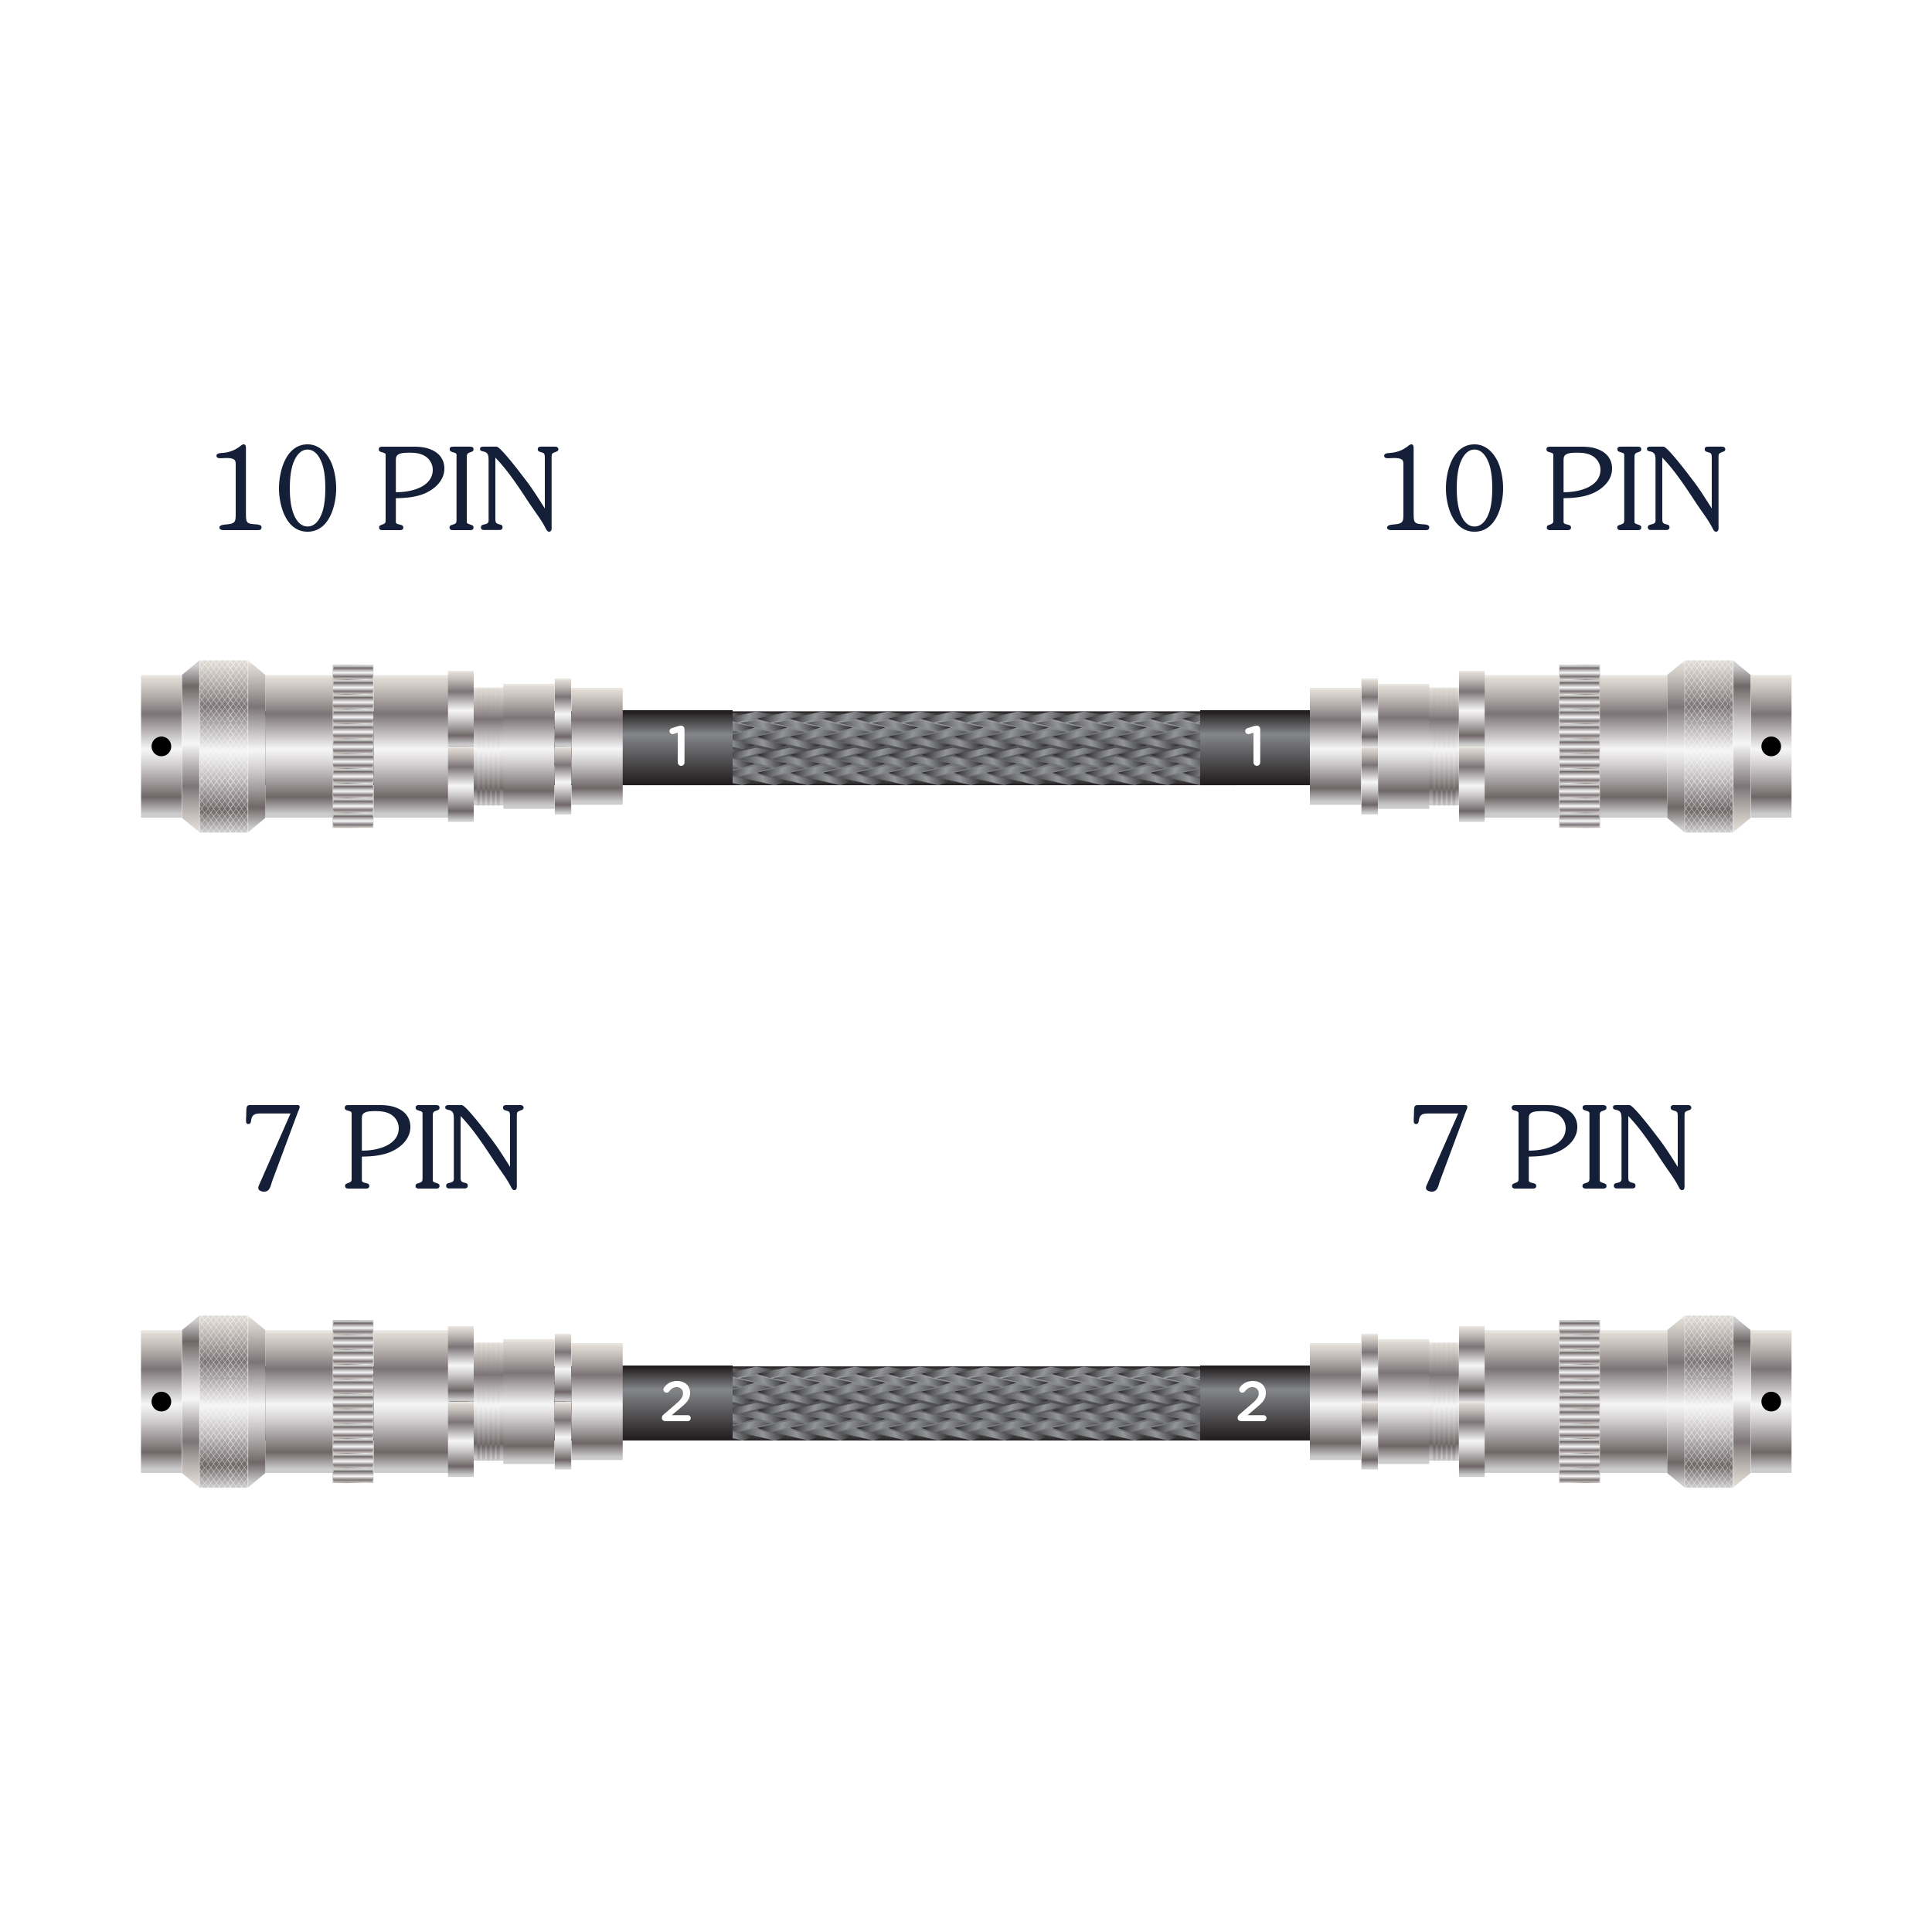 <p align="center">Tyr 2 Specialty 10 Pin / 7 Pin Cable Set</p>